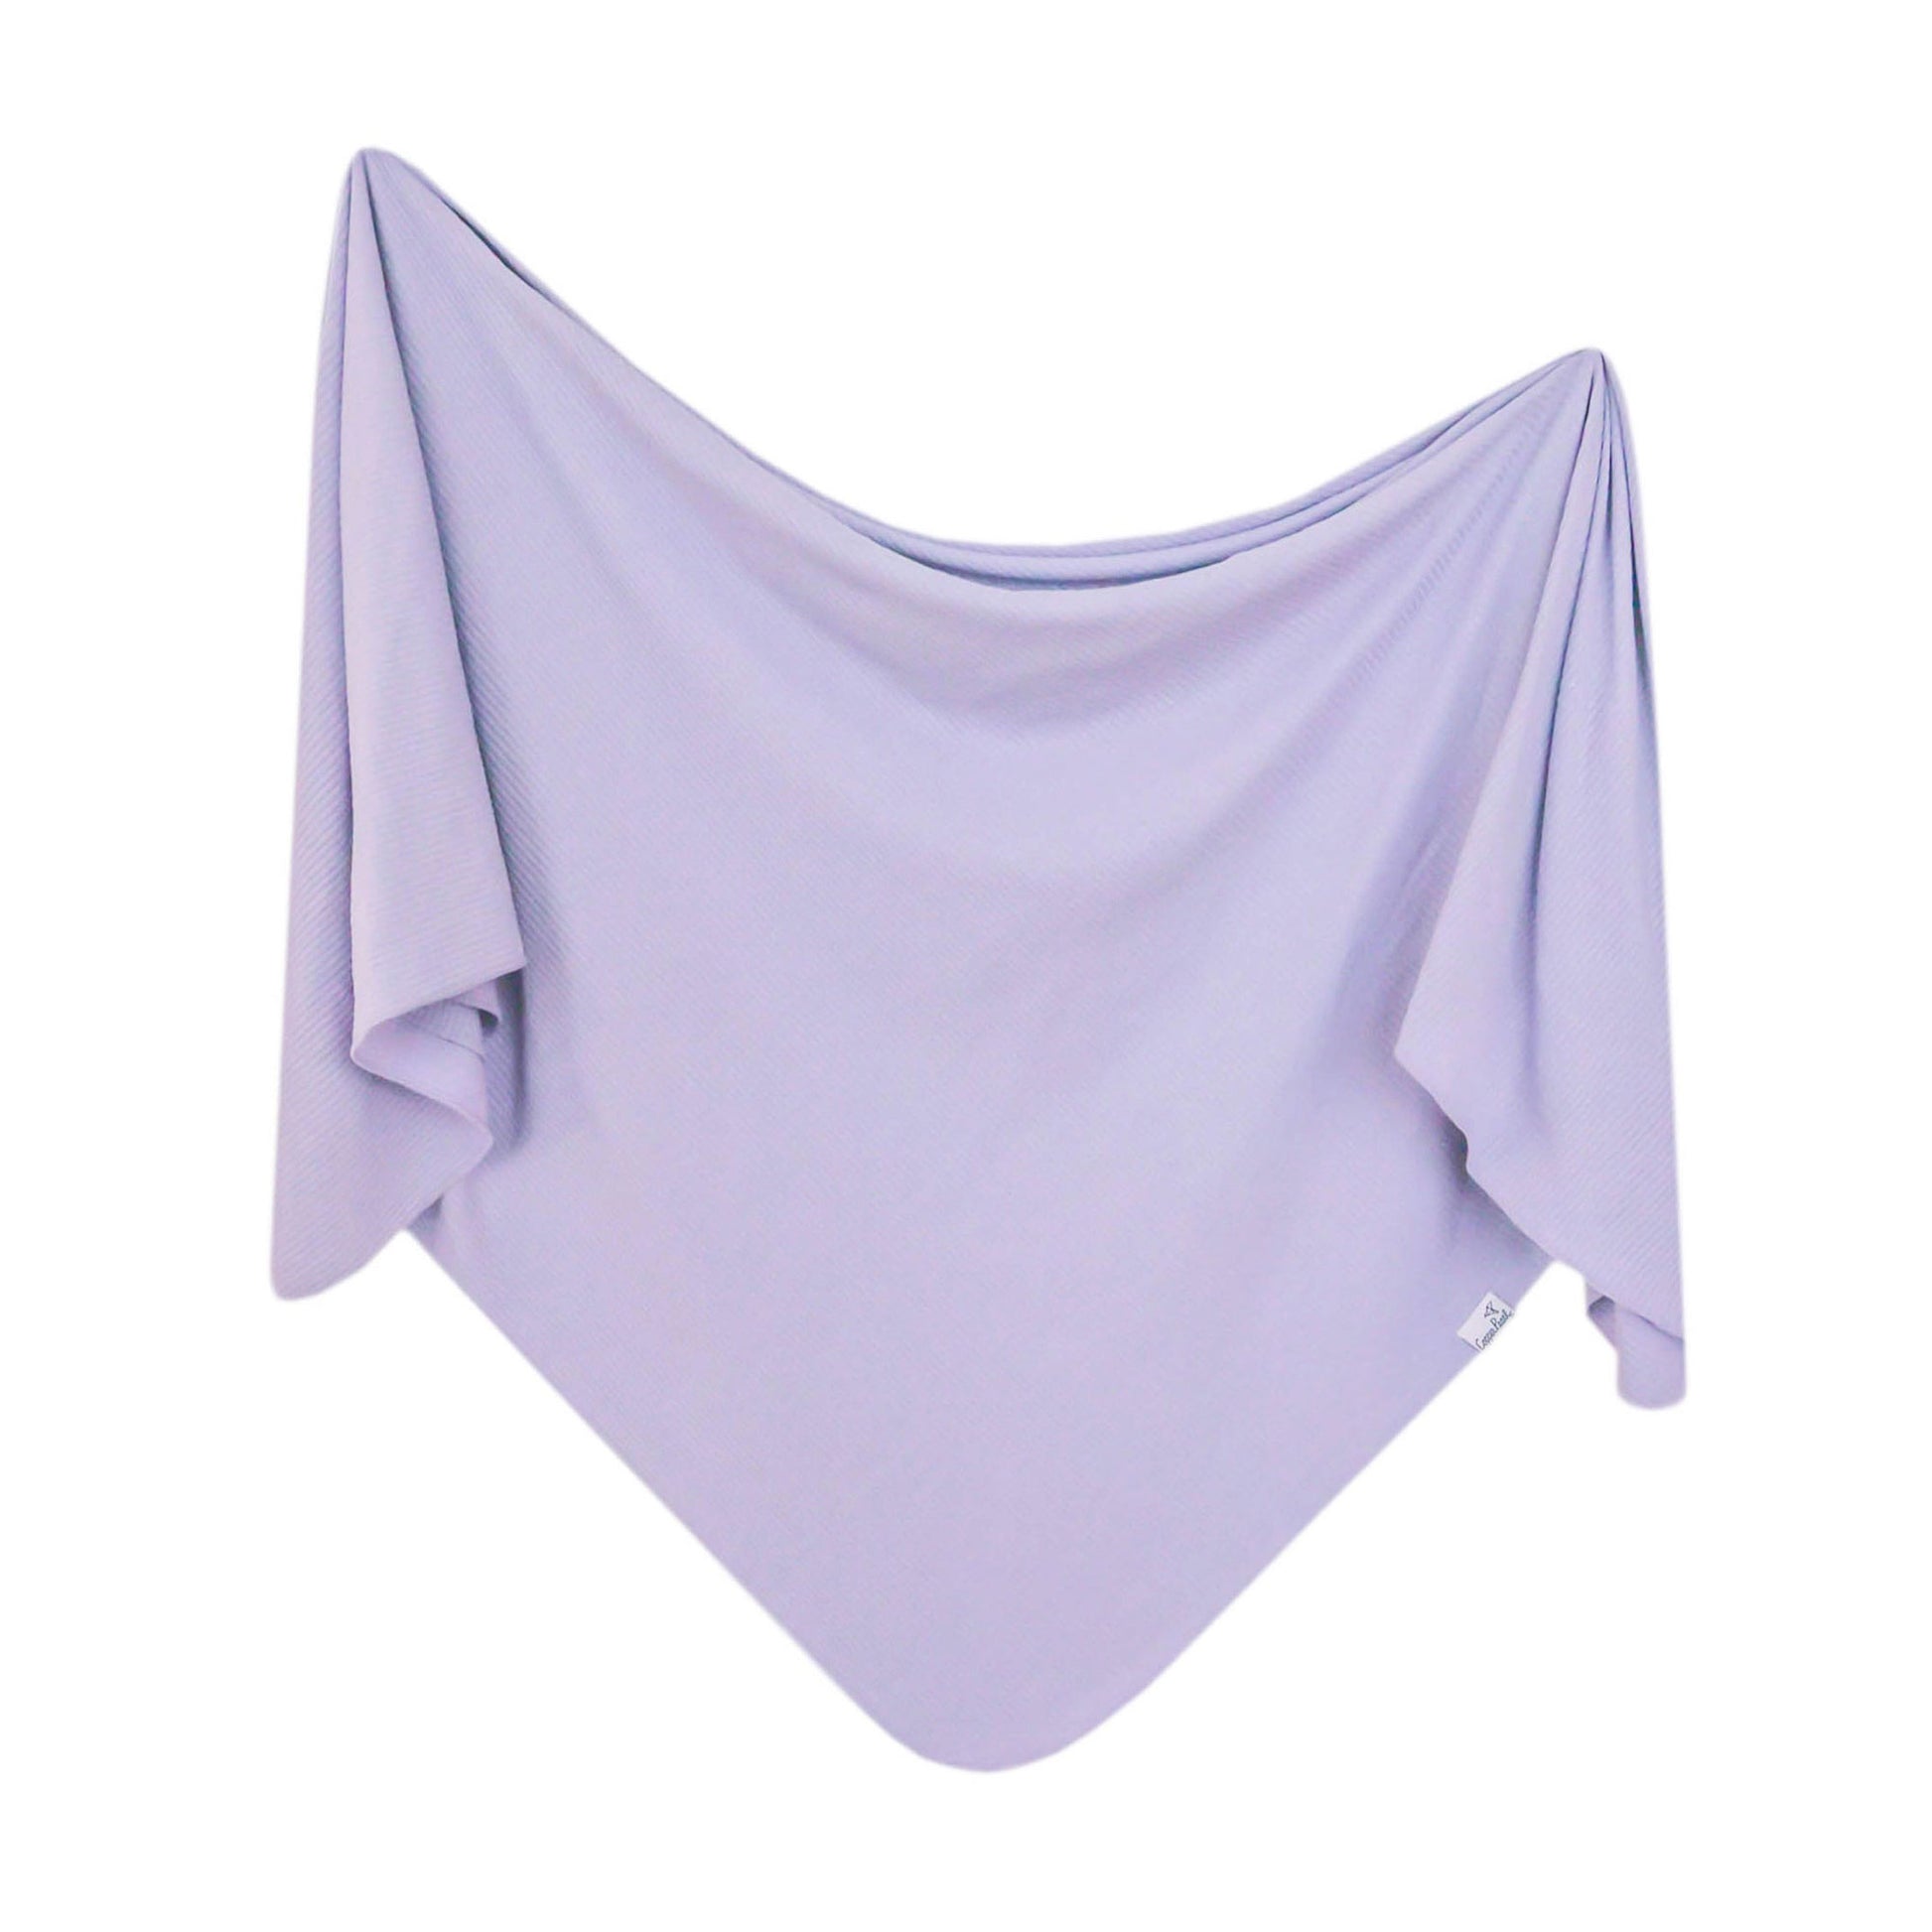 Copper Pearl Rib Knit Swaddle Blanket - Periwinkle